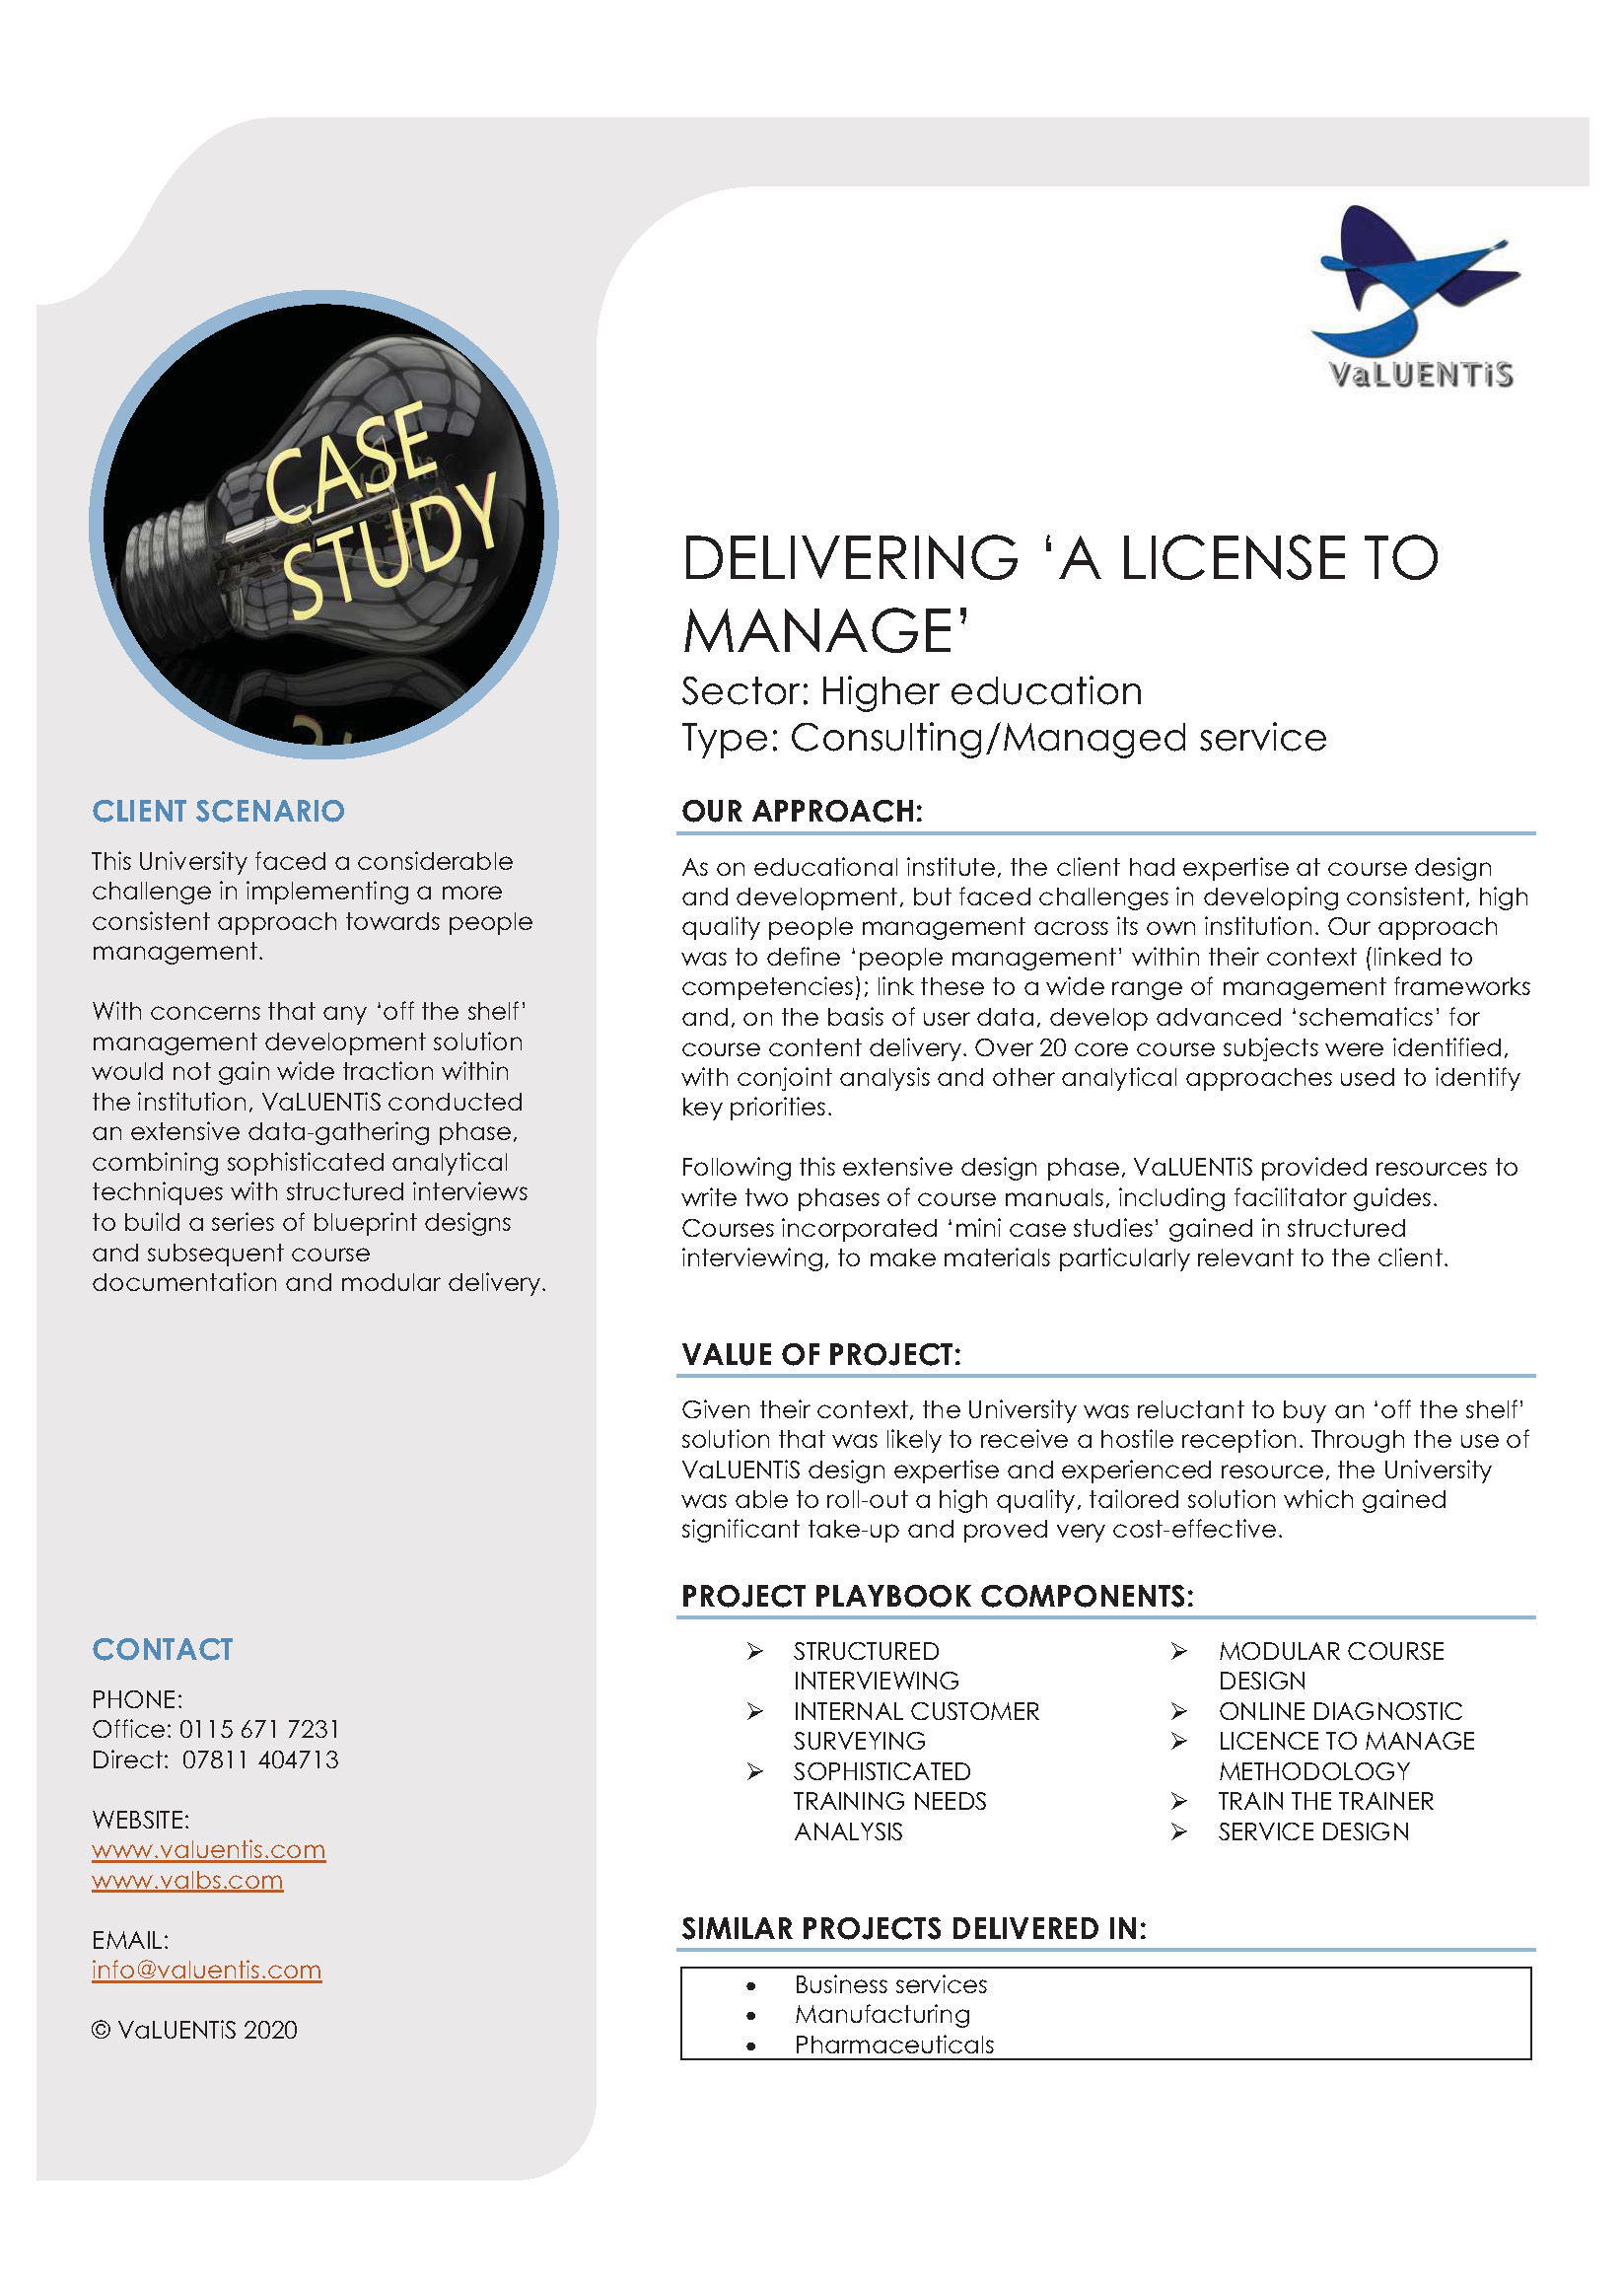 Delivering a License to Manage